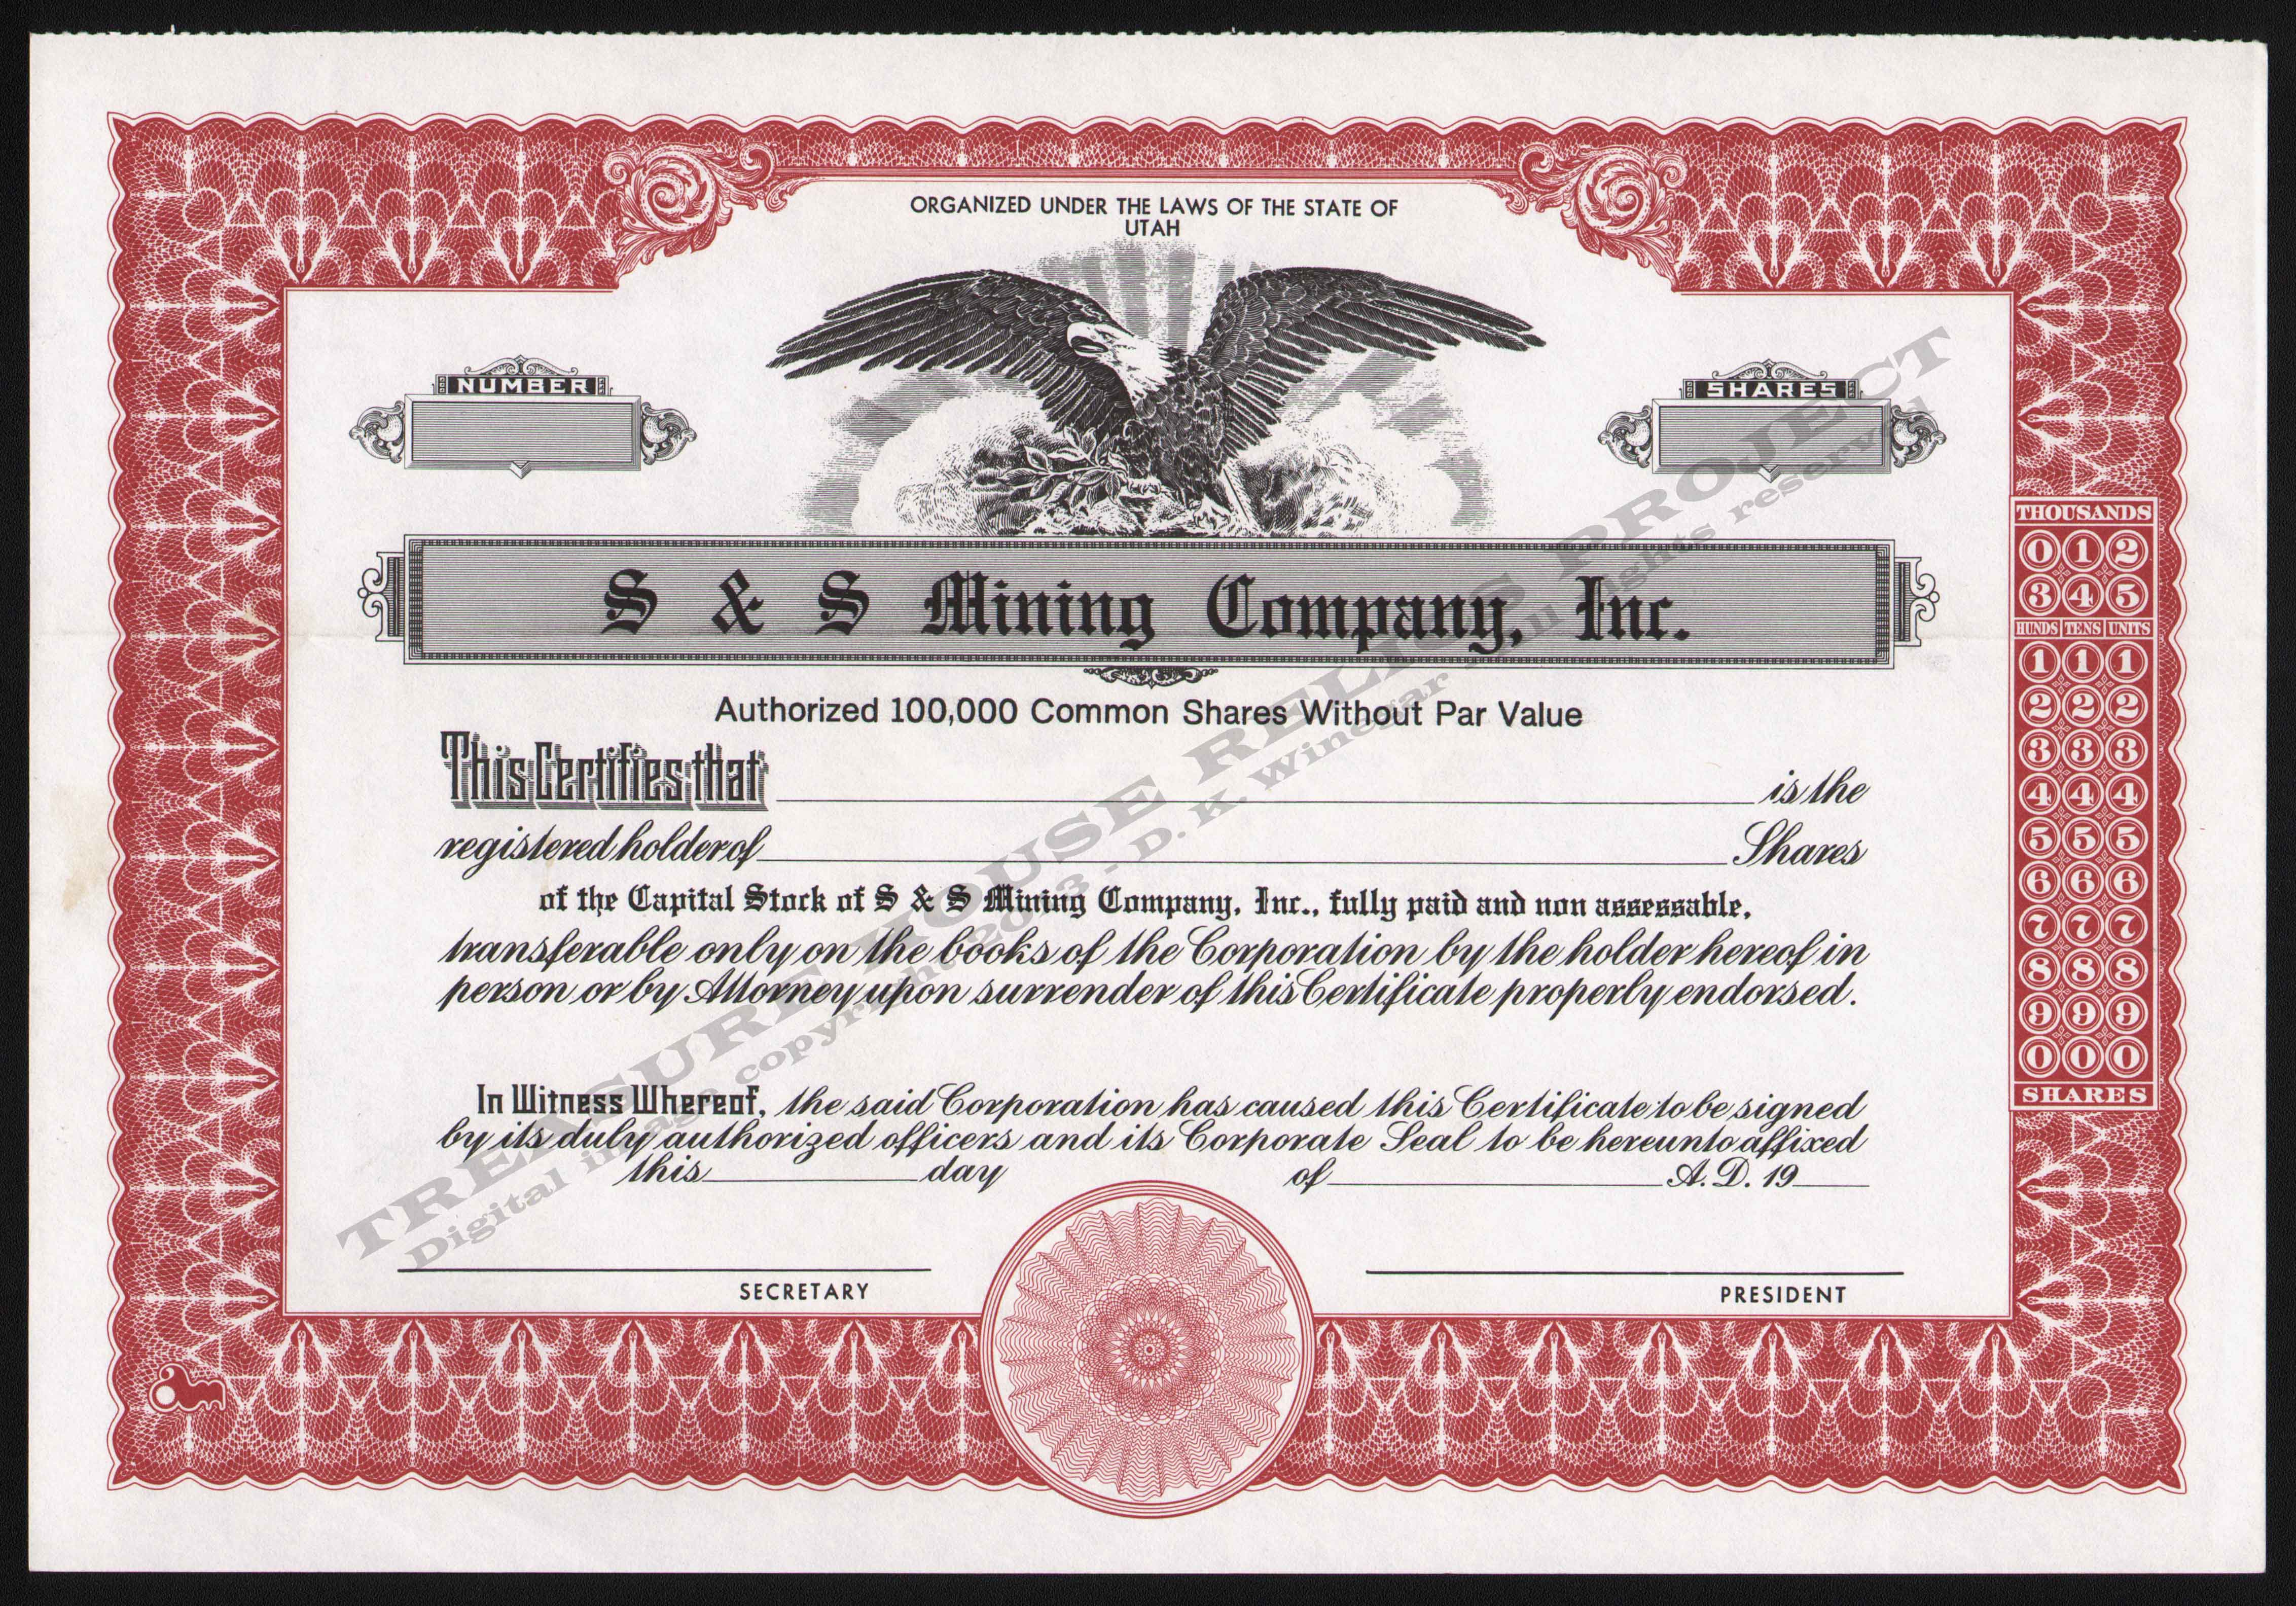 LETTERHEAD/SEVIER_CONSOLIDATED_GOLD_MINING_MILLING_PROSPECTING_COMPANY_543_1904_GP_400_CROP_EMBOSS.jpg